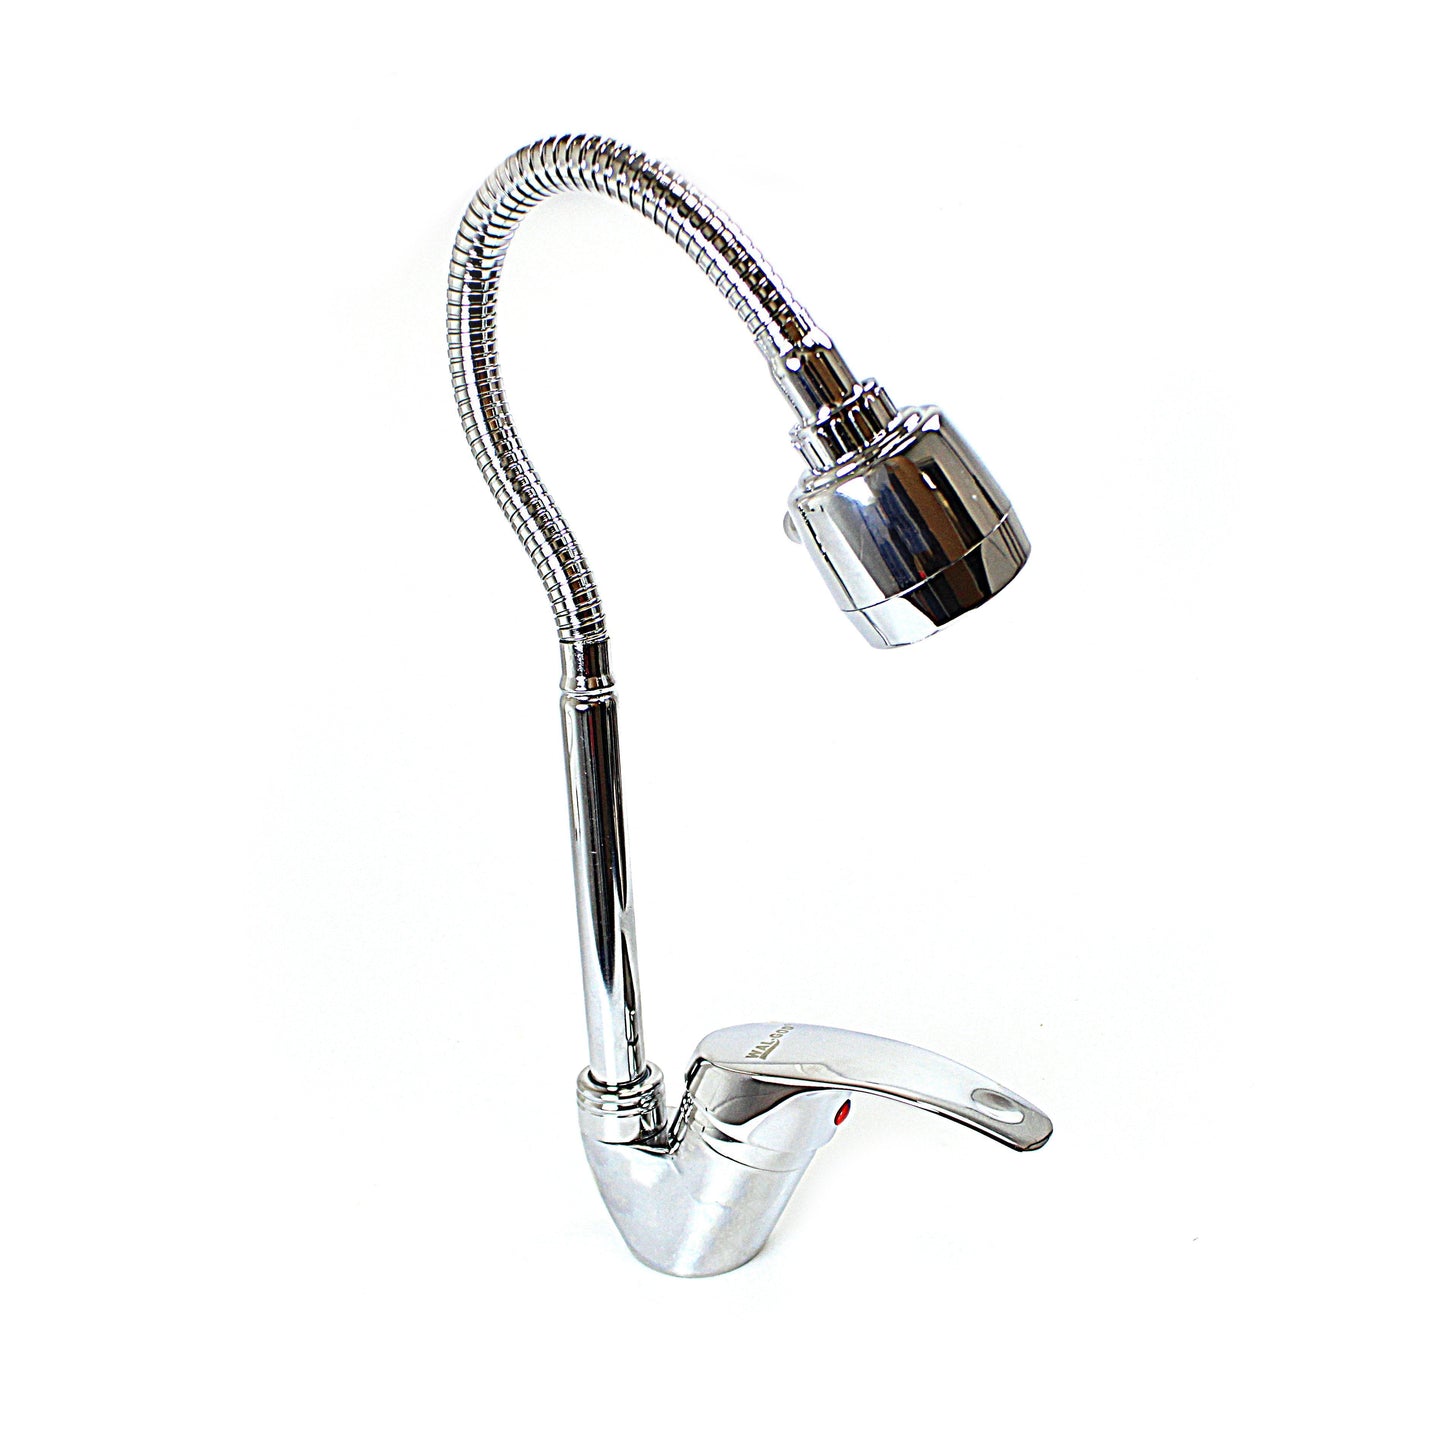 Kitchen Sink Flexible Sprayer Tap Water Spray Adapter Adjustable Pull Chrome 0848 (Parcel Rate)